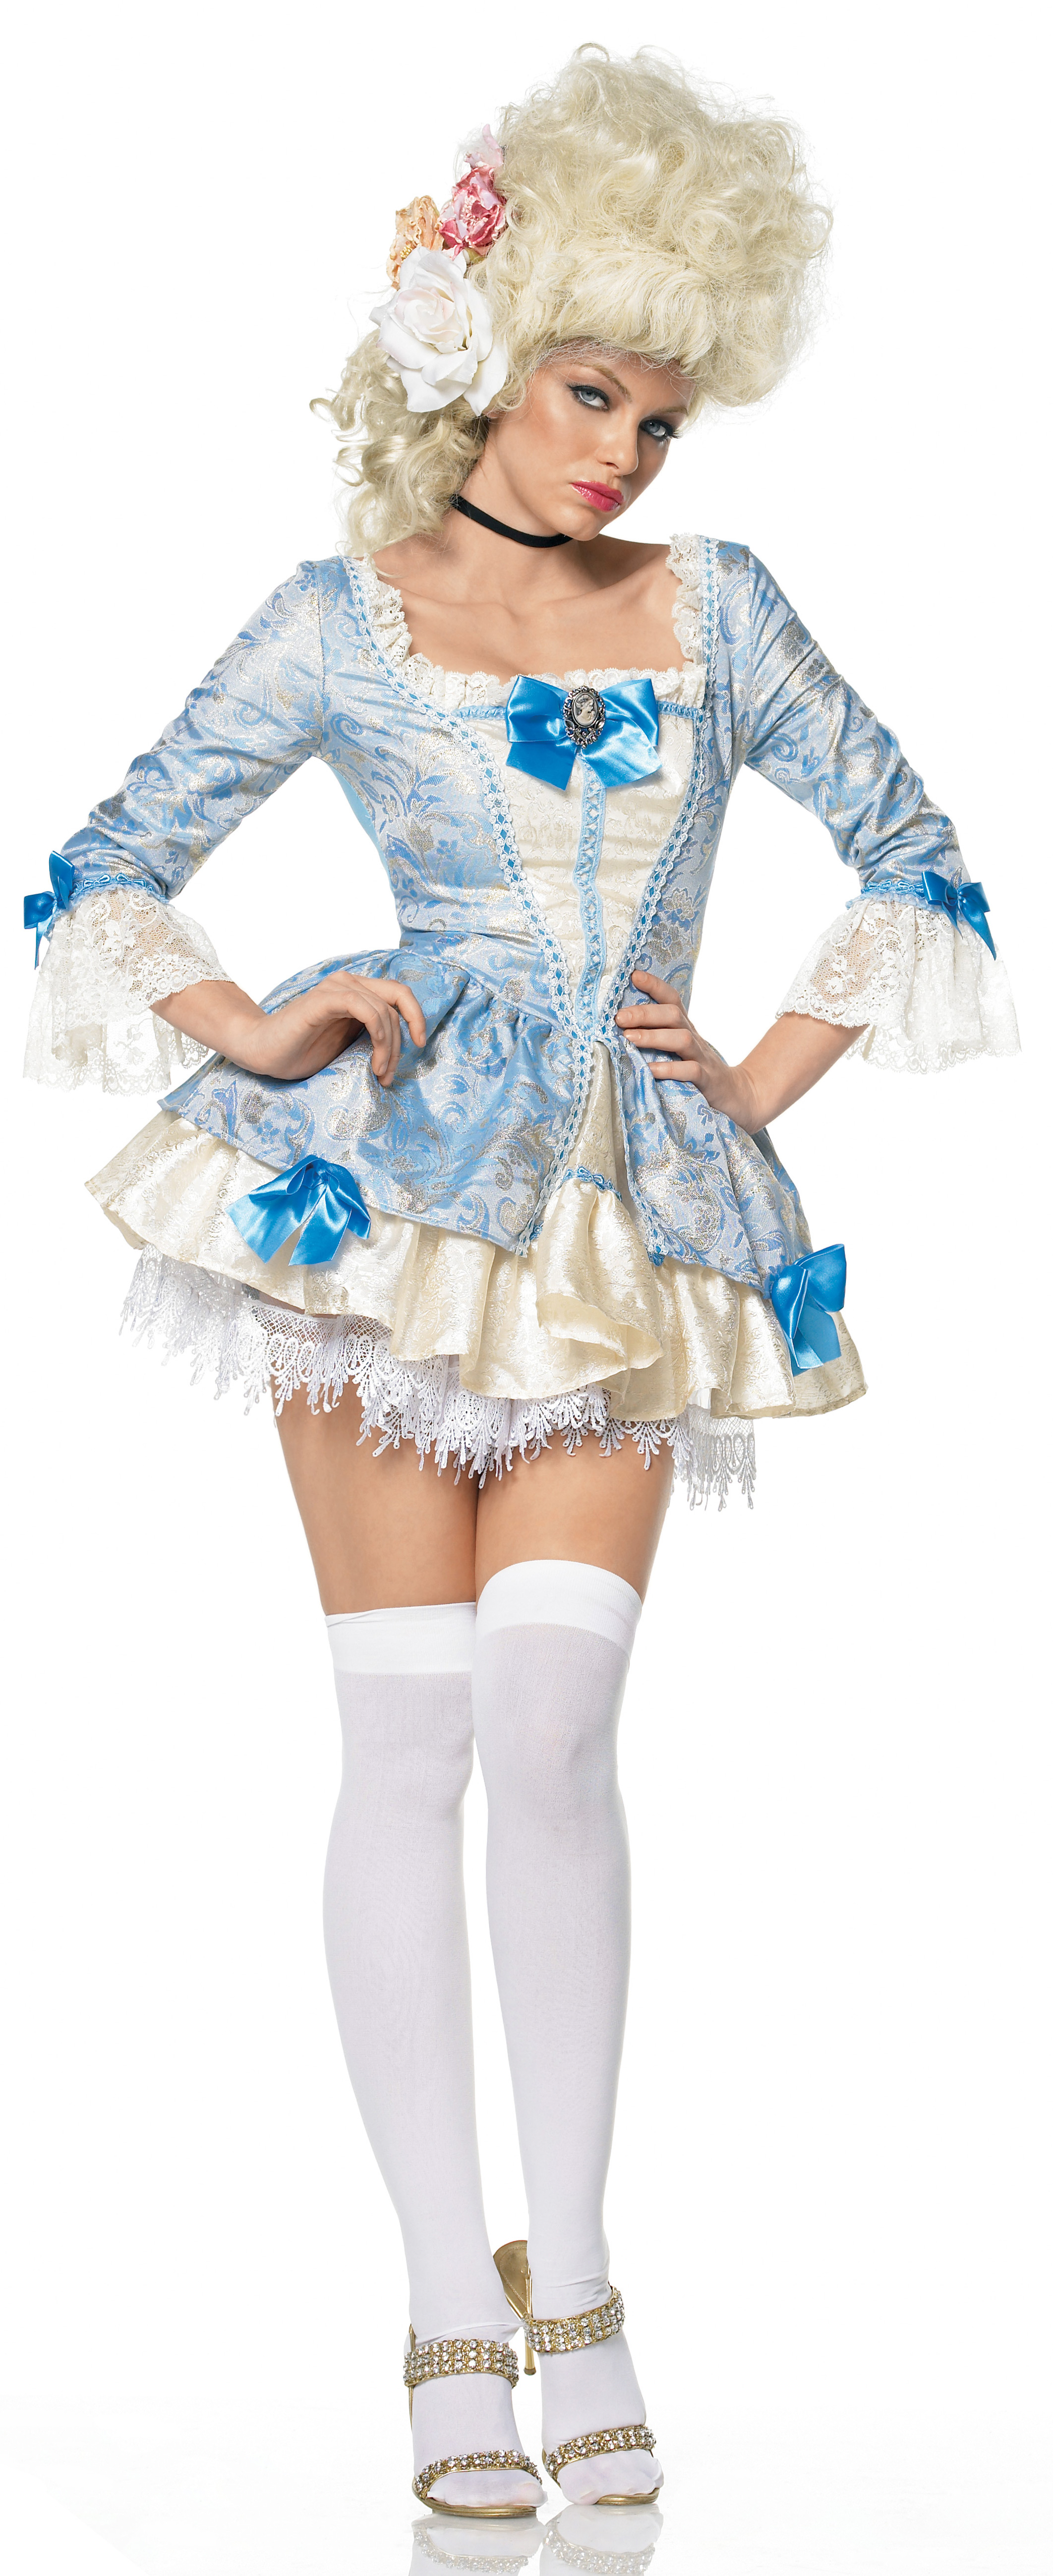 Leg Avenue Women's Lady Marie Baby Blue Sexy Adult Costume - Large